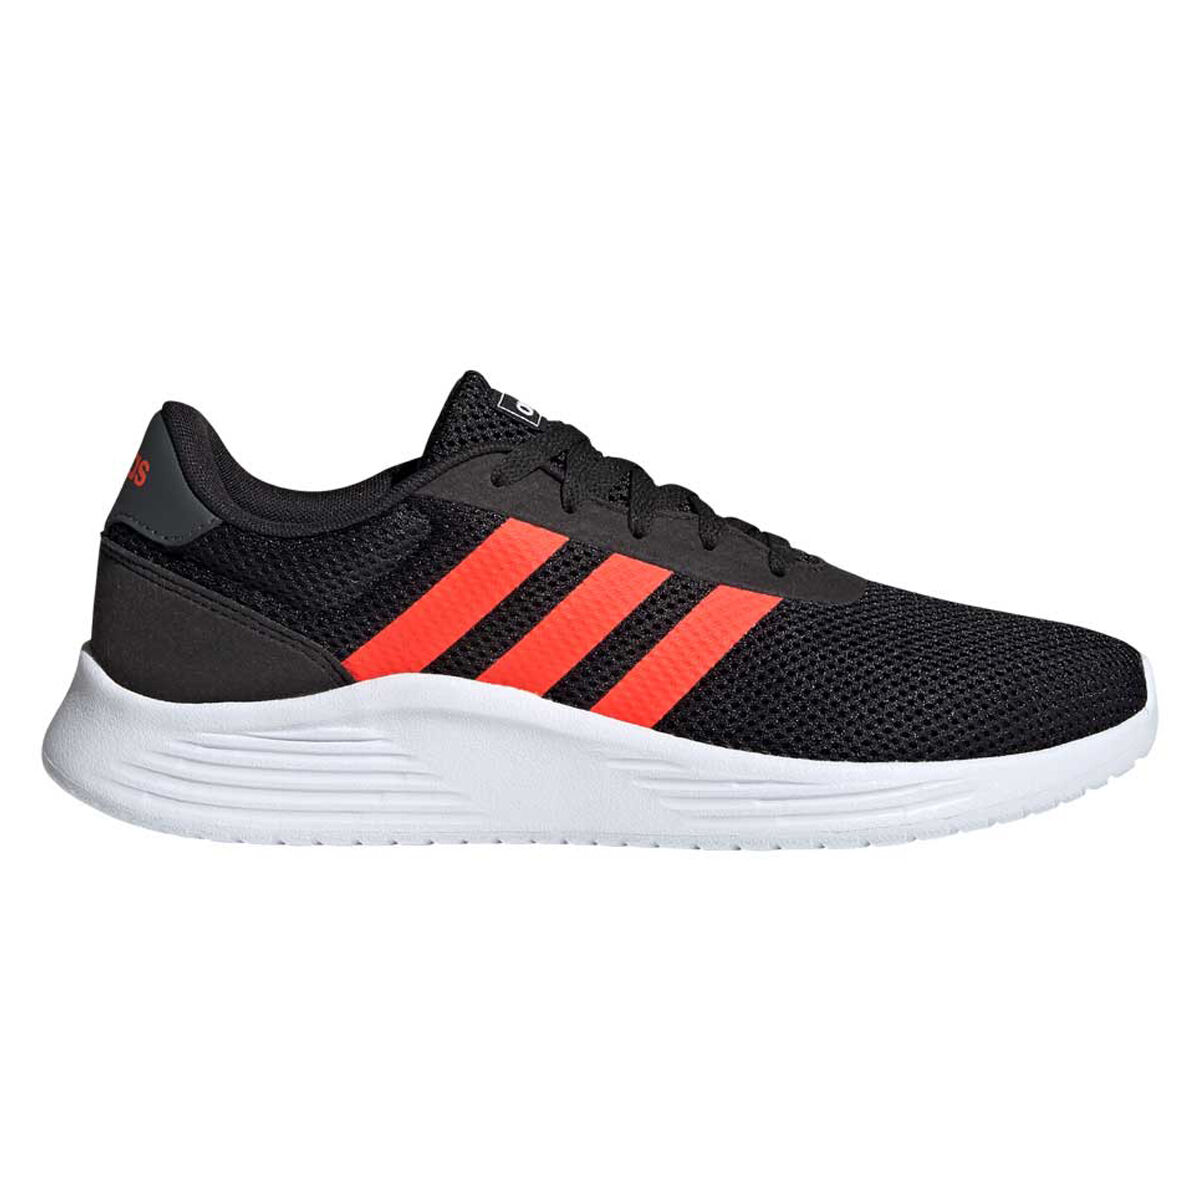 men's casual adidas shoes